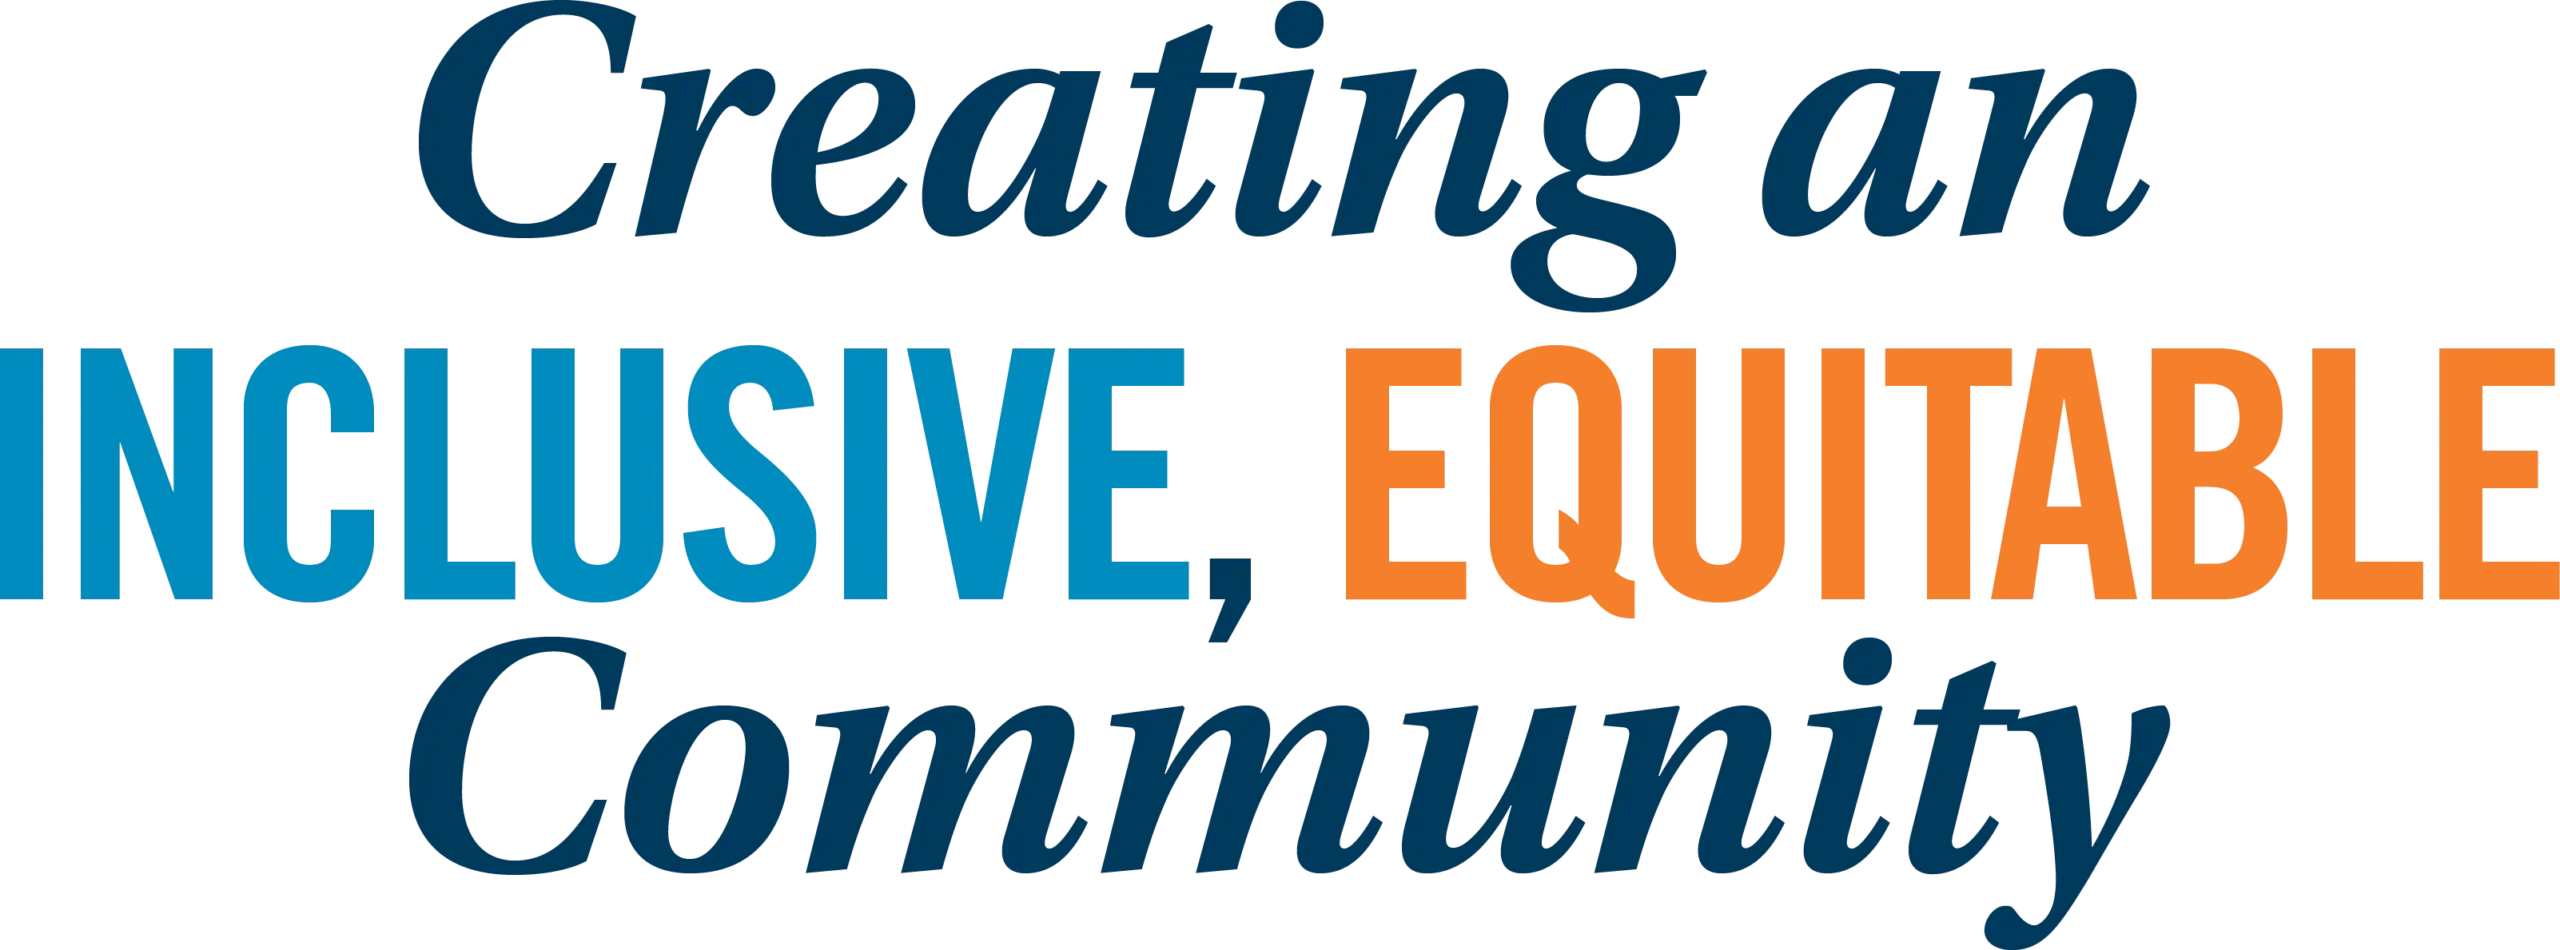 Creating an Inclusive, Equitable Community typographic title